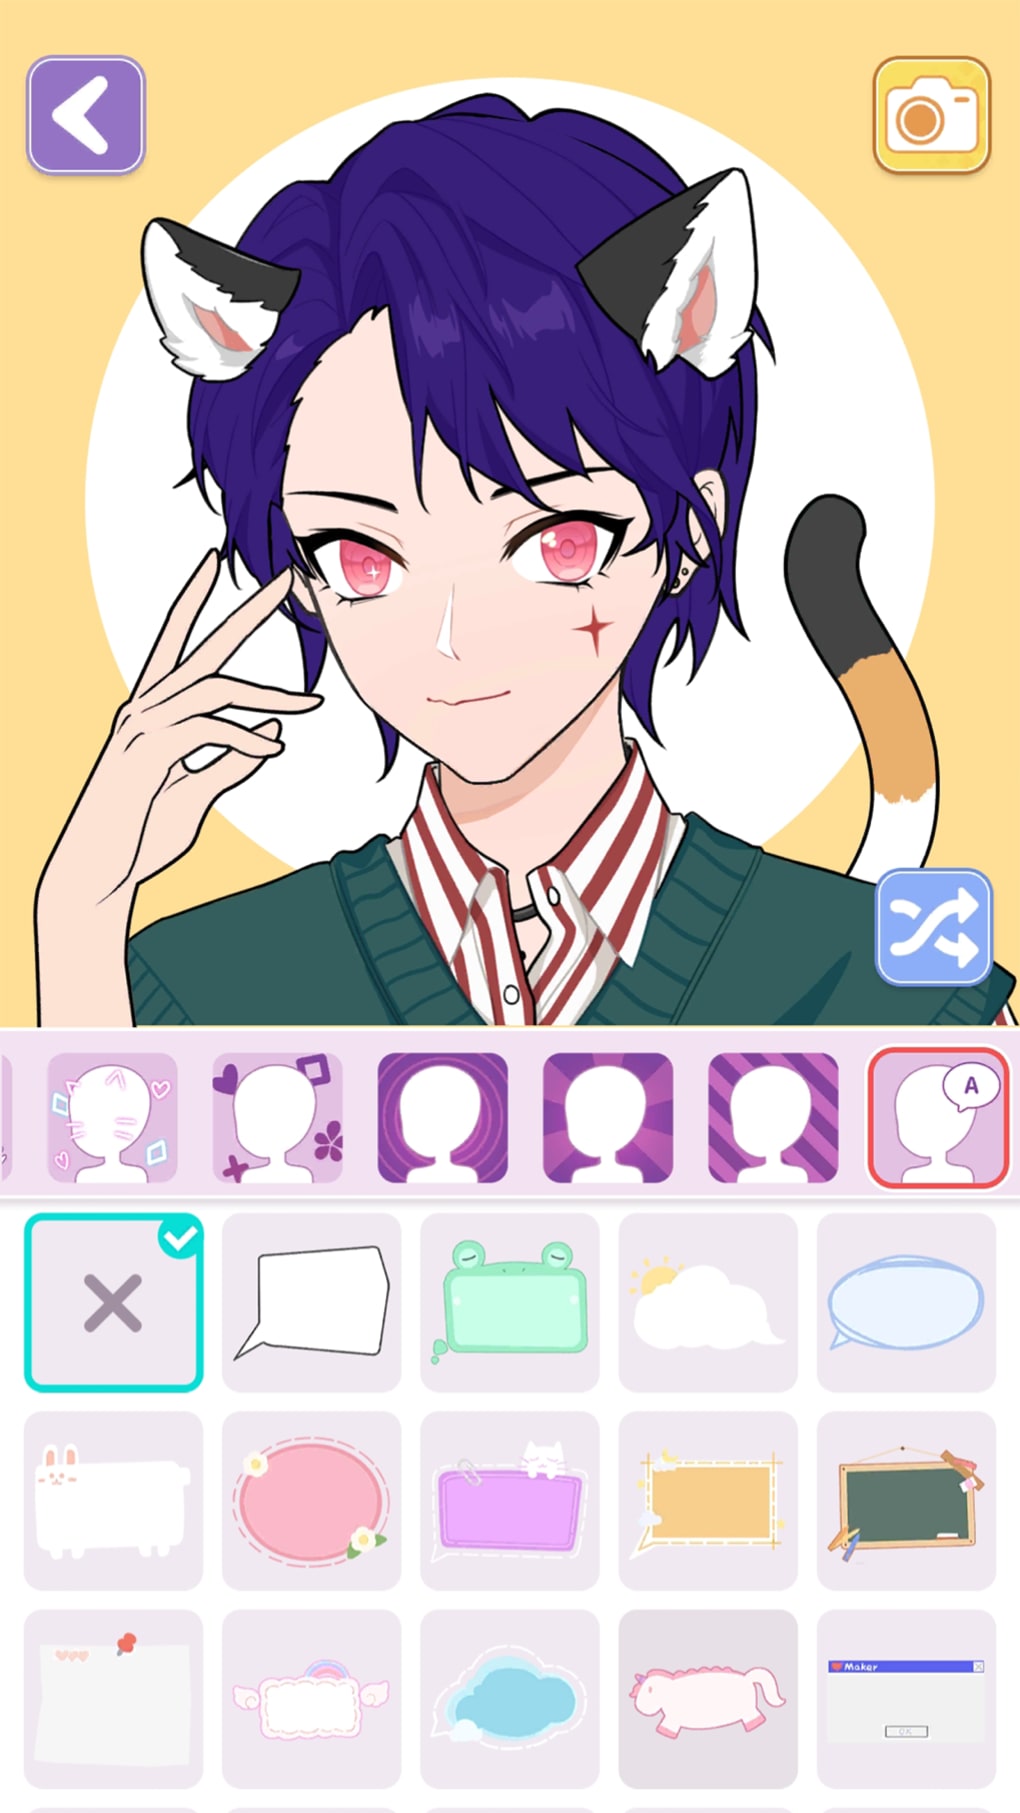 Anime Avatar Maker: Express Yourself in a Different Way